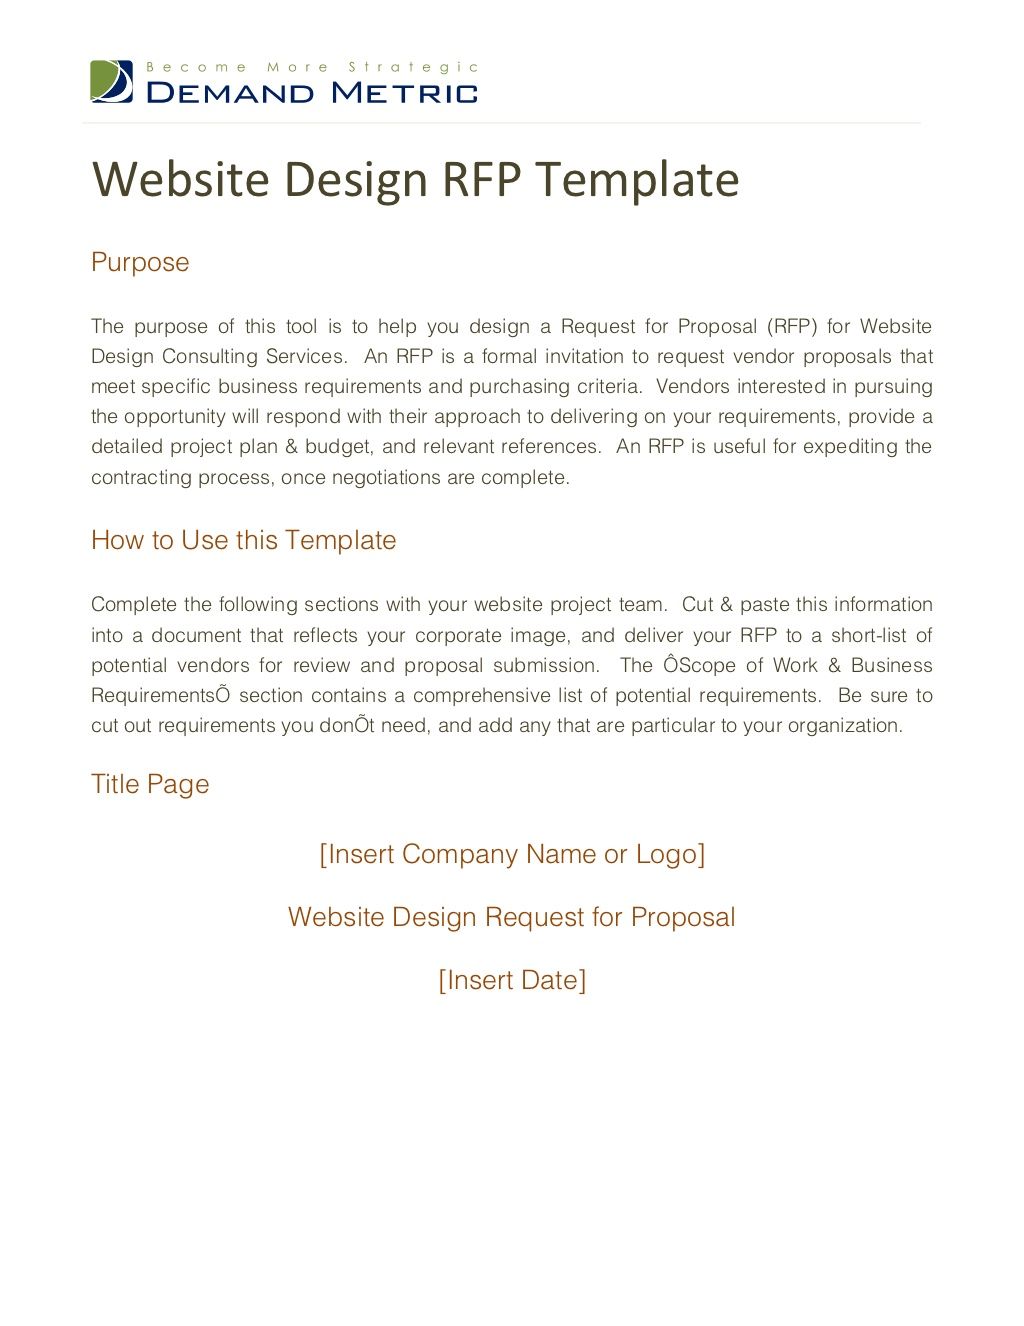 5 Key Components to Include in Your Website Design RFP